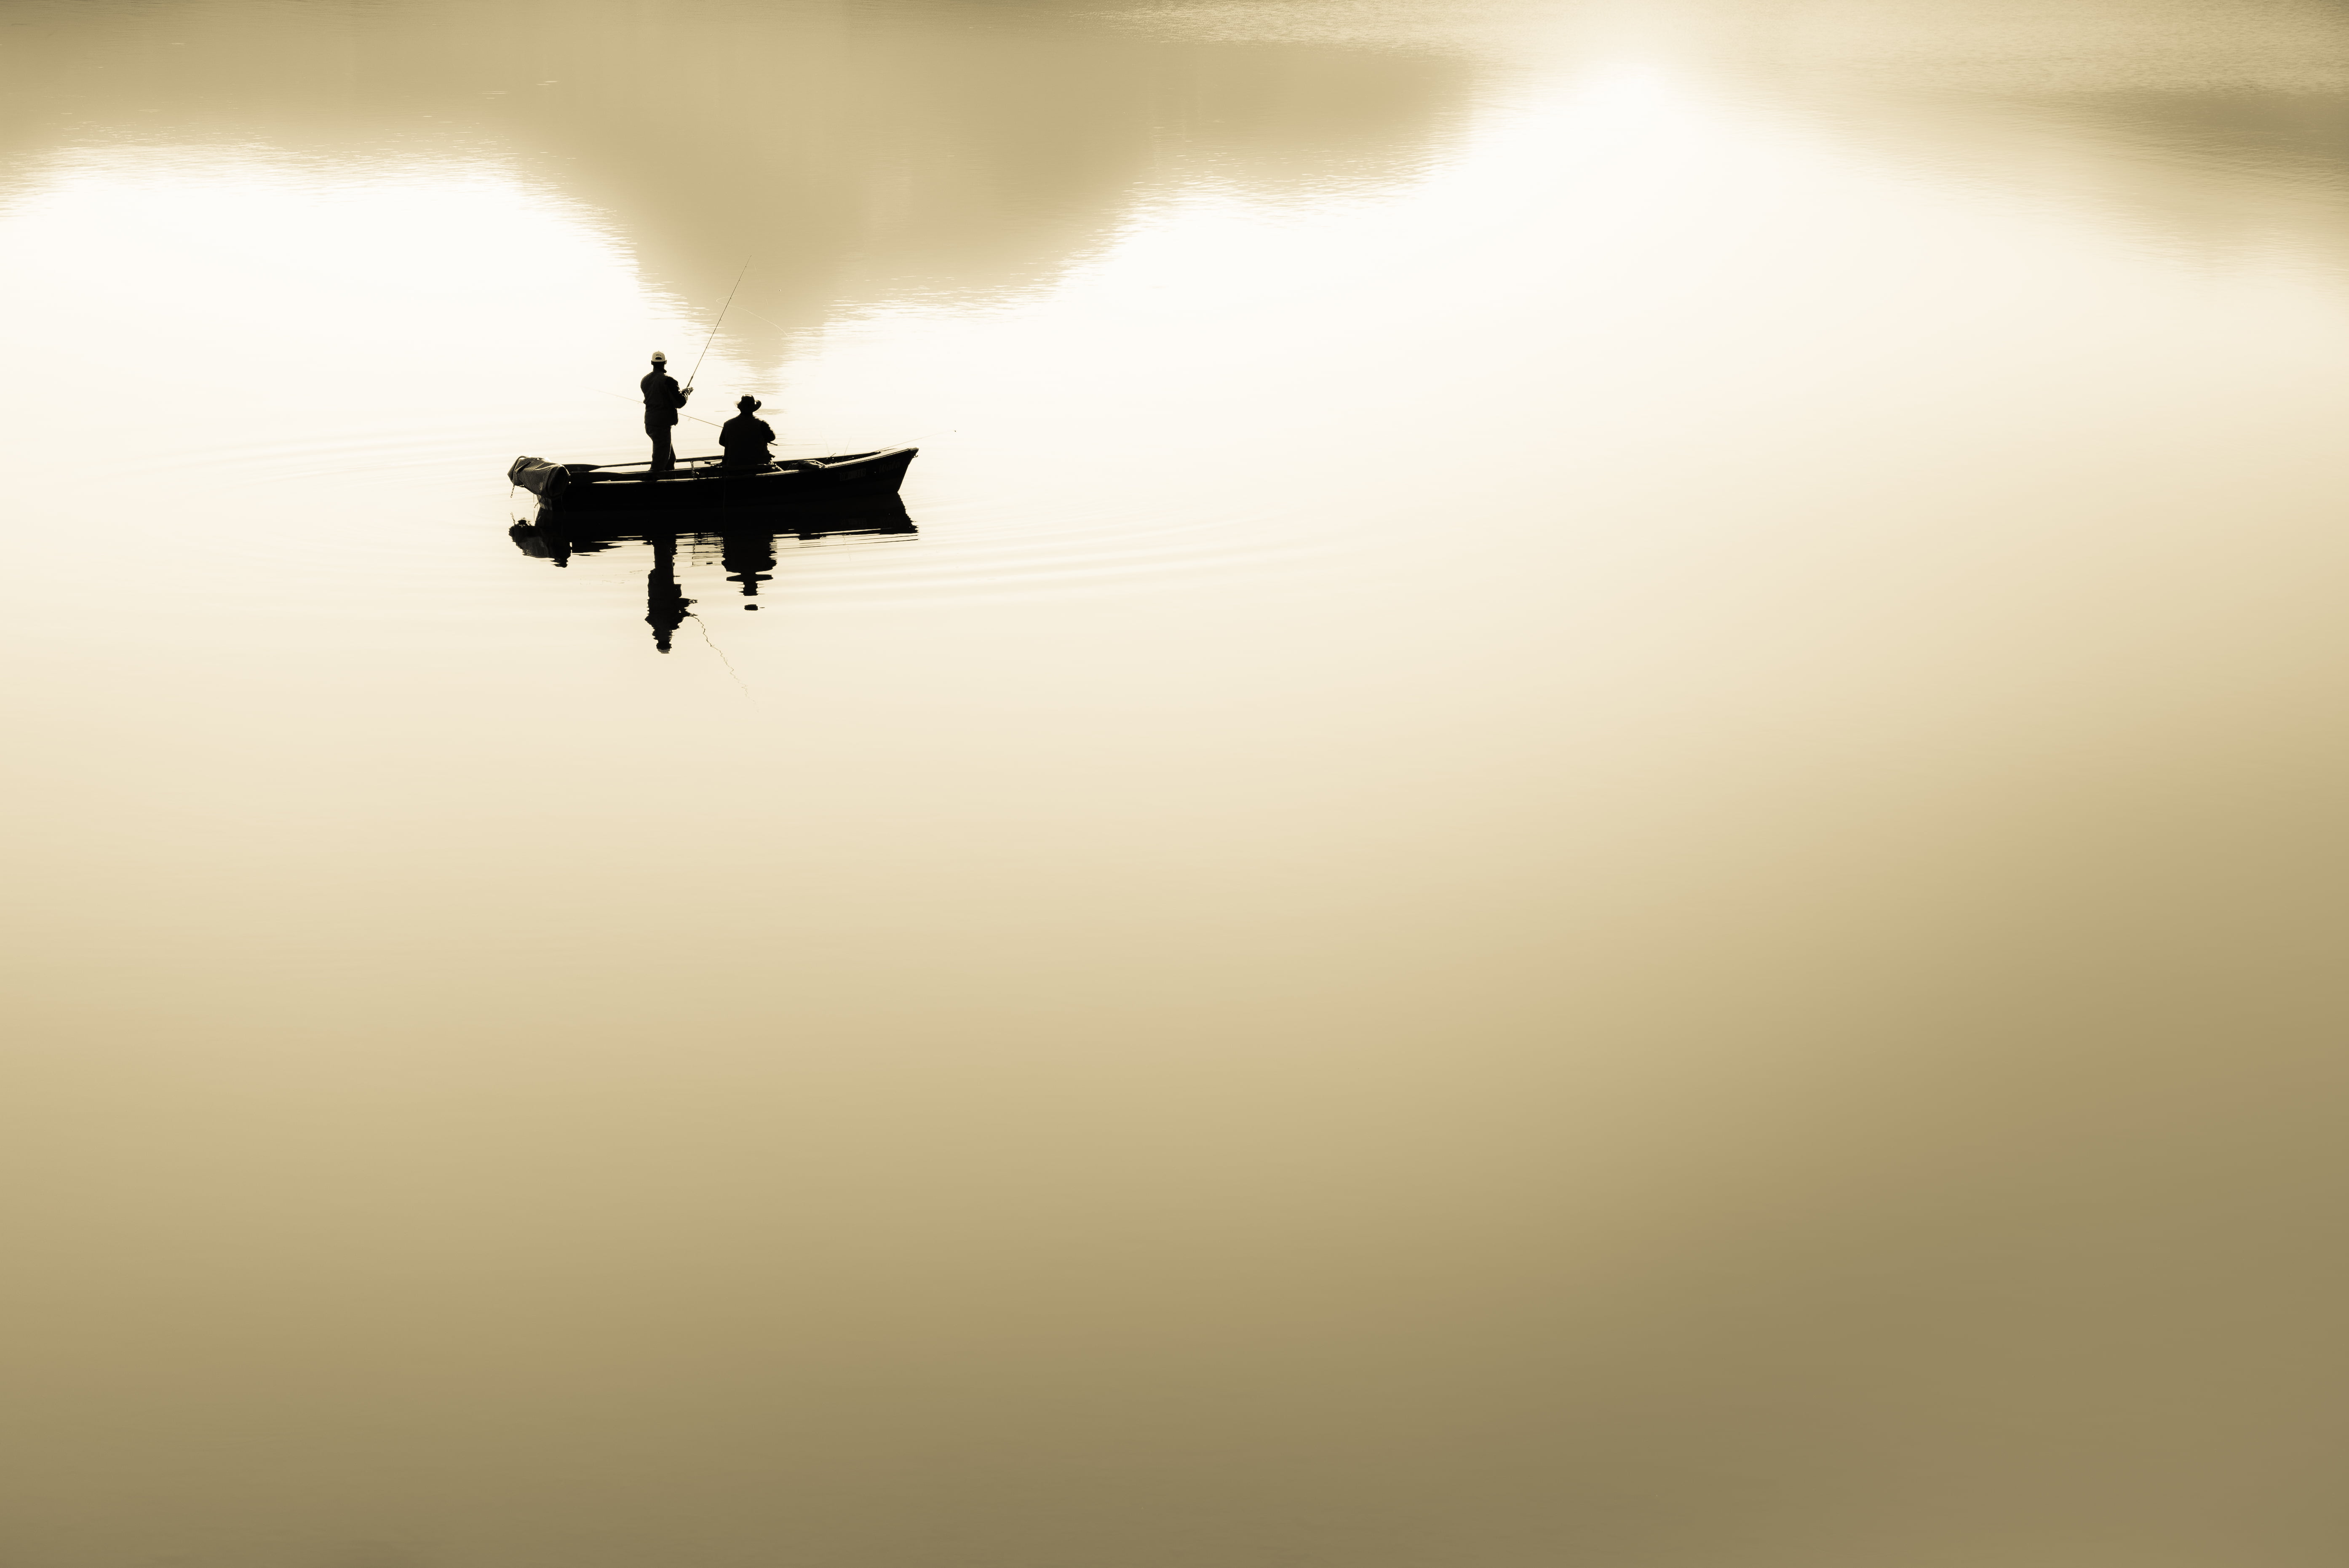 silhouette of two people in boat fishing during daytime, Melchsee-Frutt